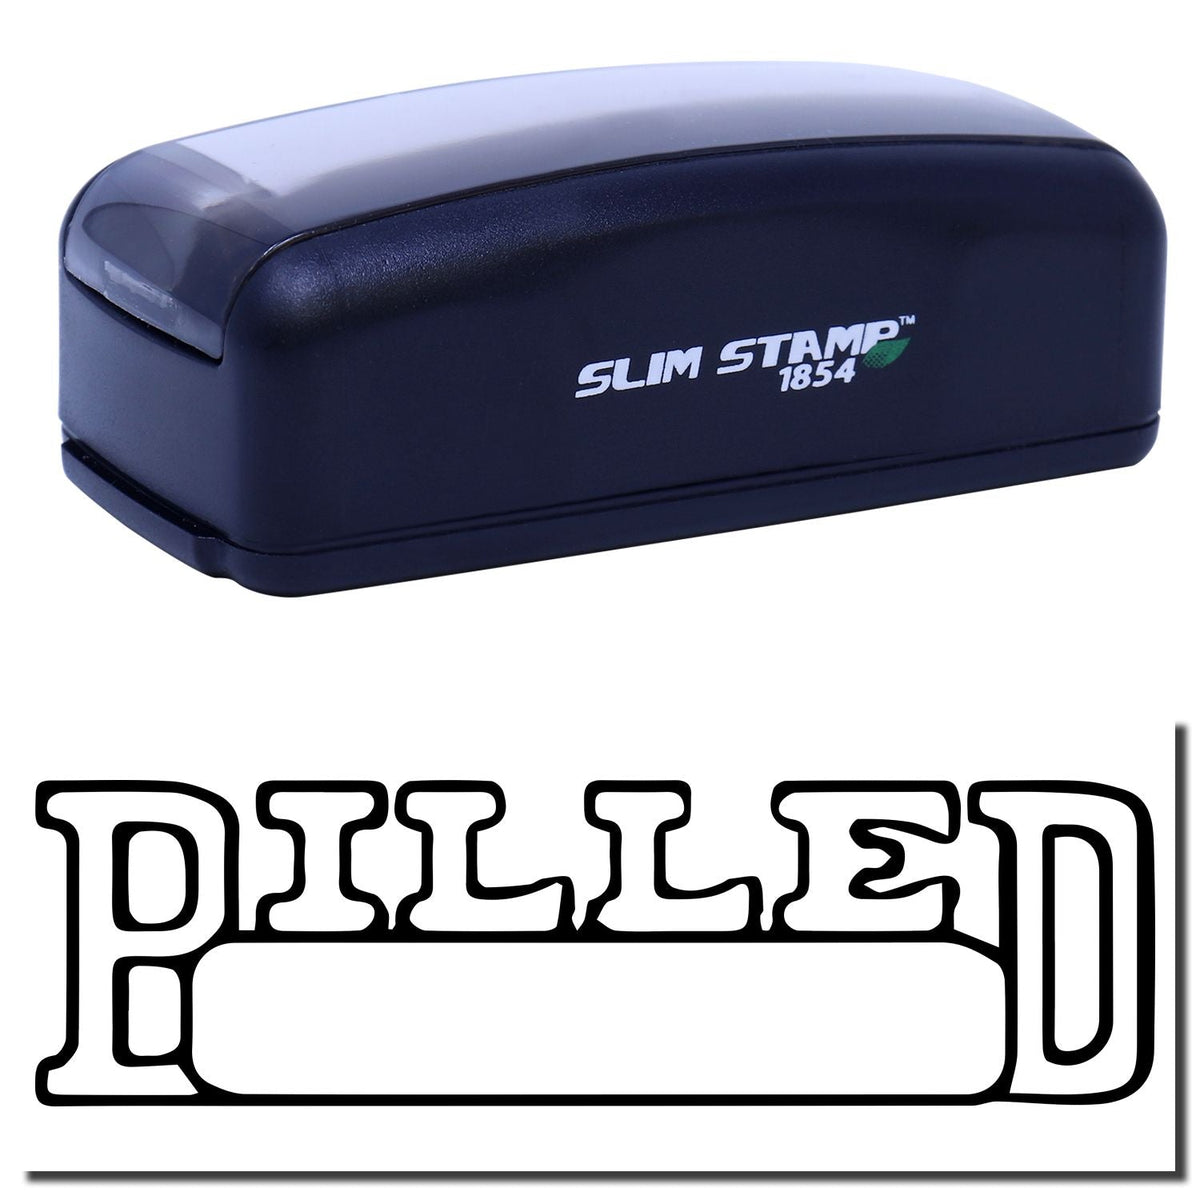 A stock office pre-inked stamp with a stamped image showing how the text &quot;BILLED&quot; in a large outline font with a date box is displayed after stamping.